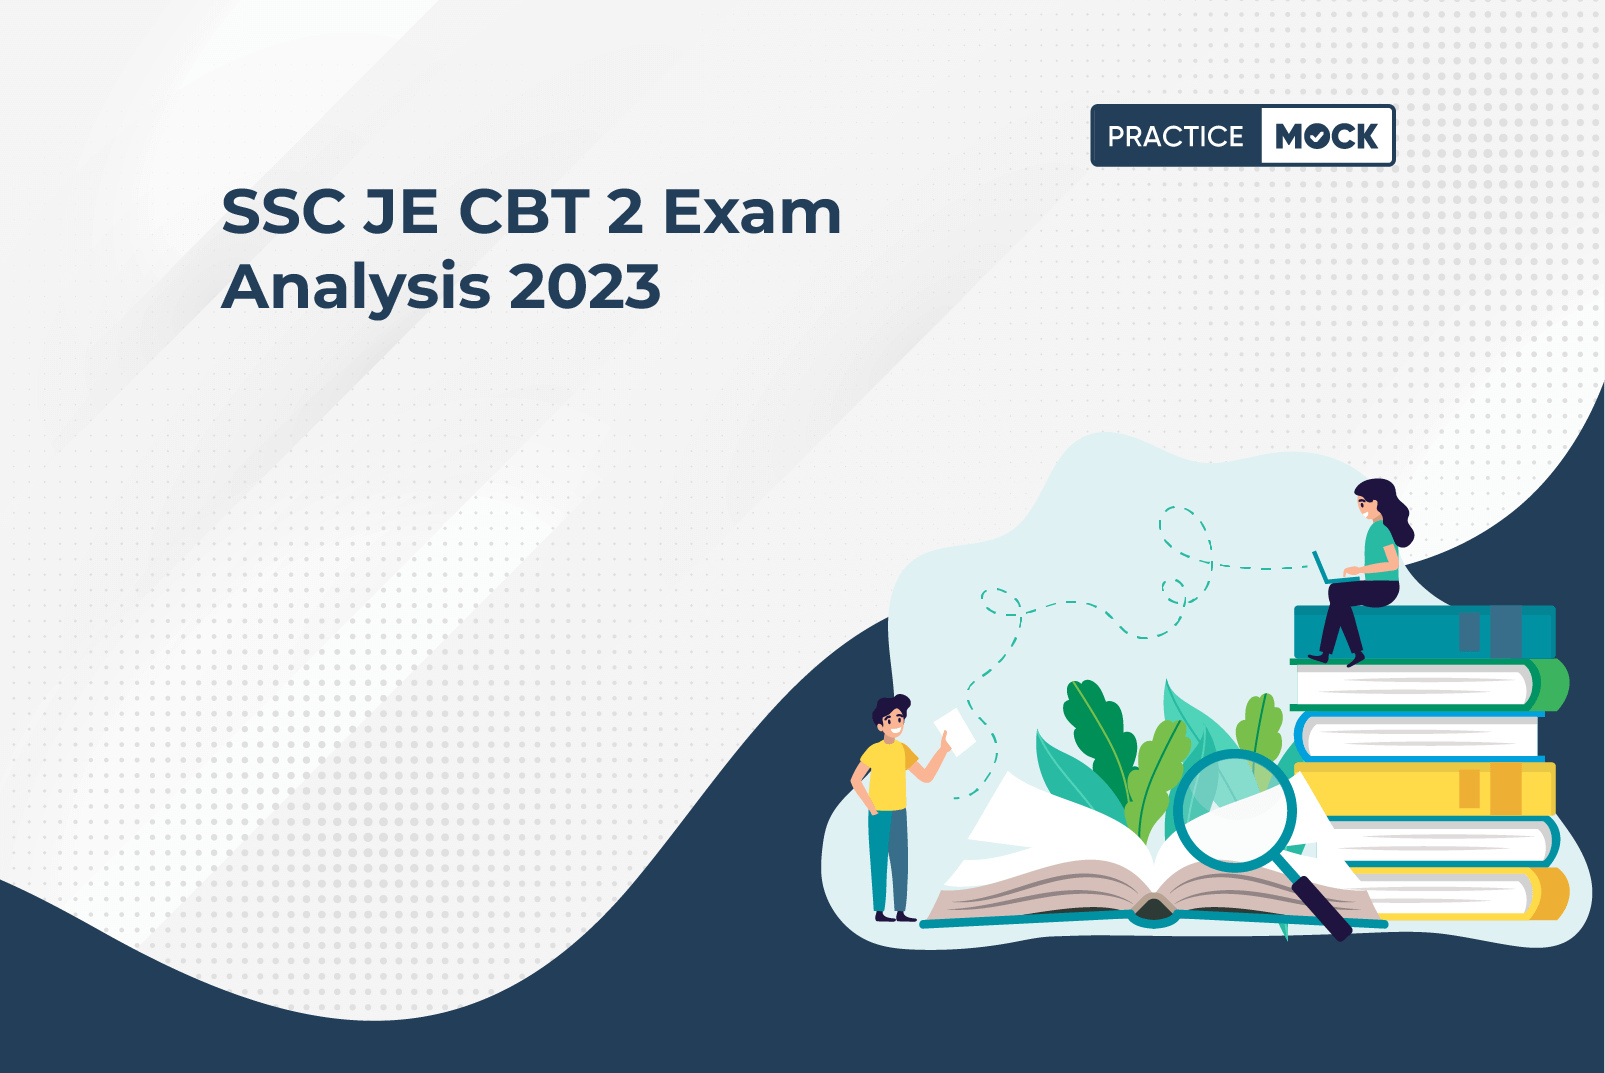 SSC JE Exam 2023 Tier 2 Analysis: Insights into 04 December, Difficulty Levels, and Questions Asked